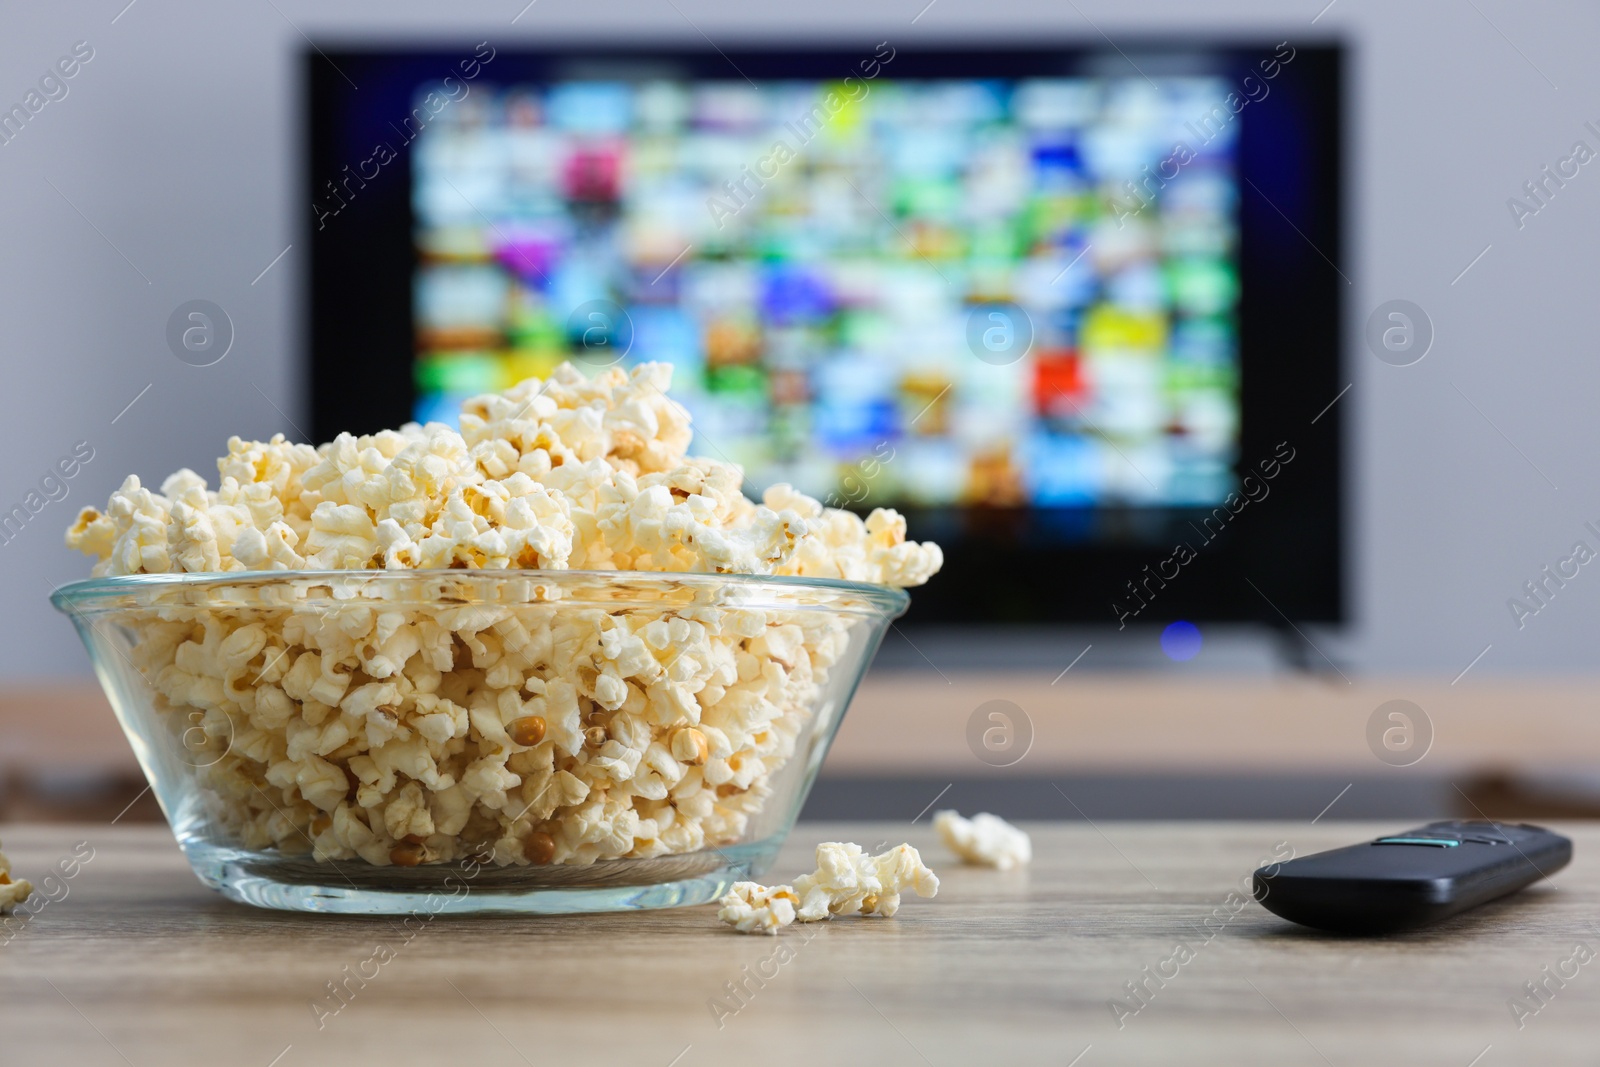 Photo of Bowl of popcorn and TV remote control on table indoors